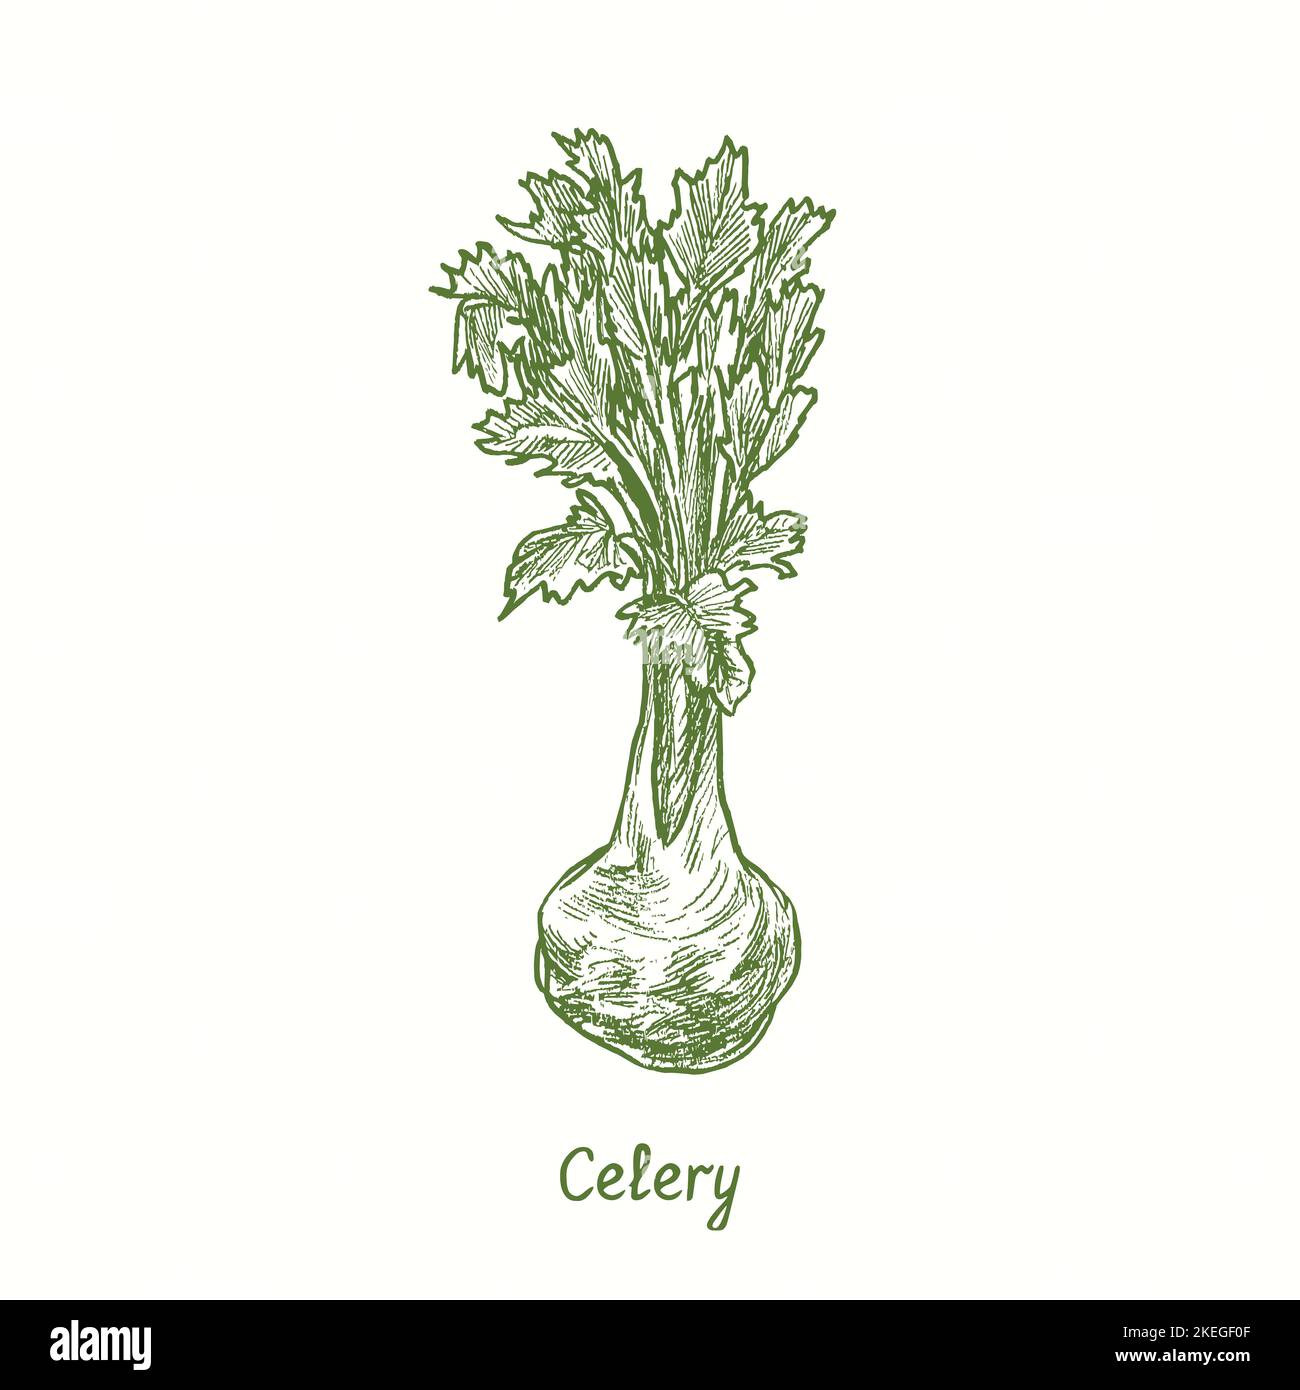 Celery.  Ink black and white doodle drawing in woodcut style Stock Photo